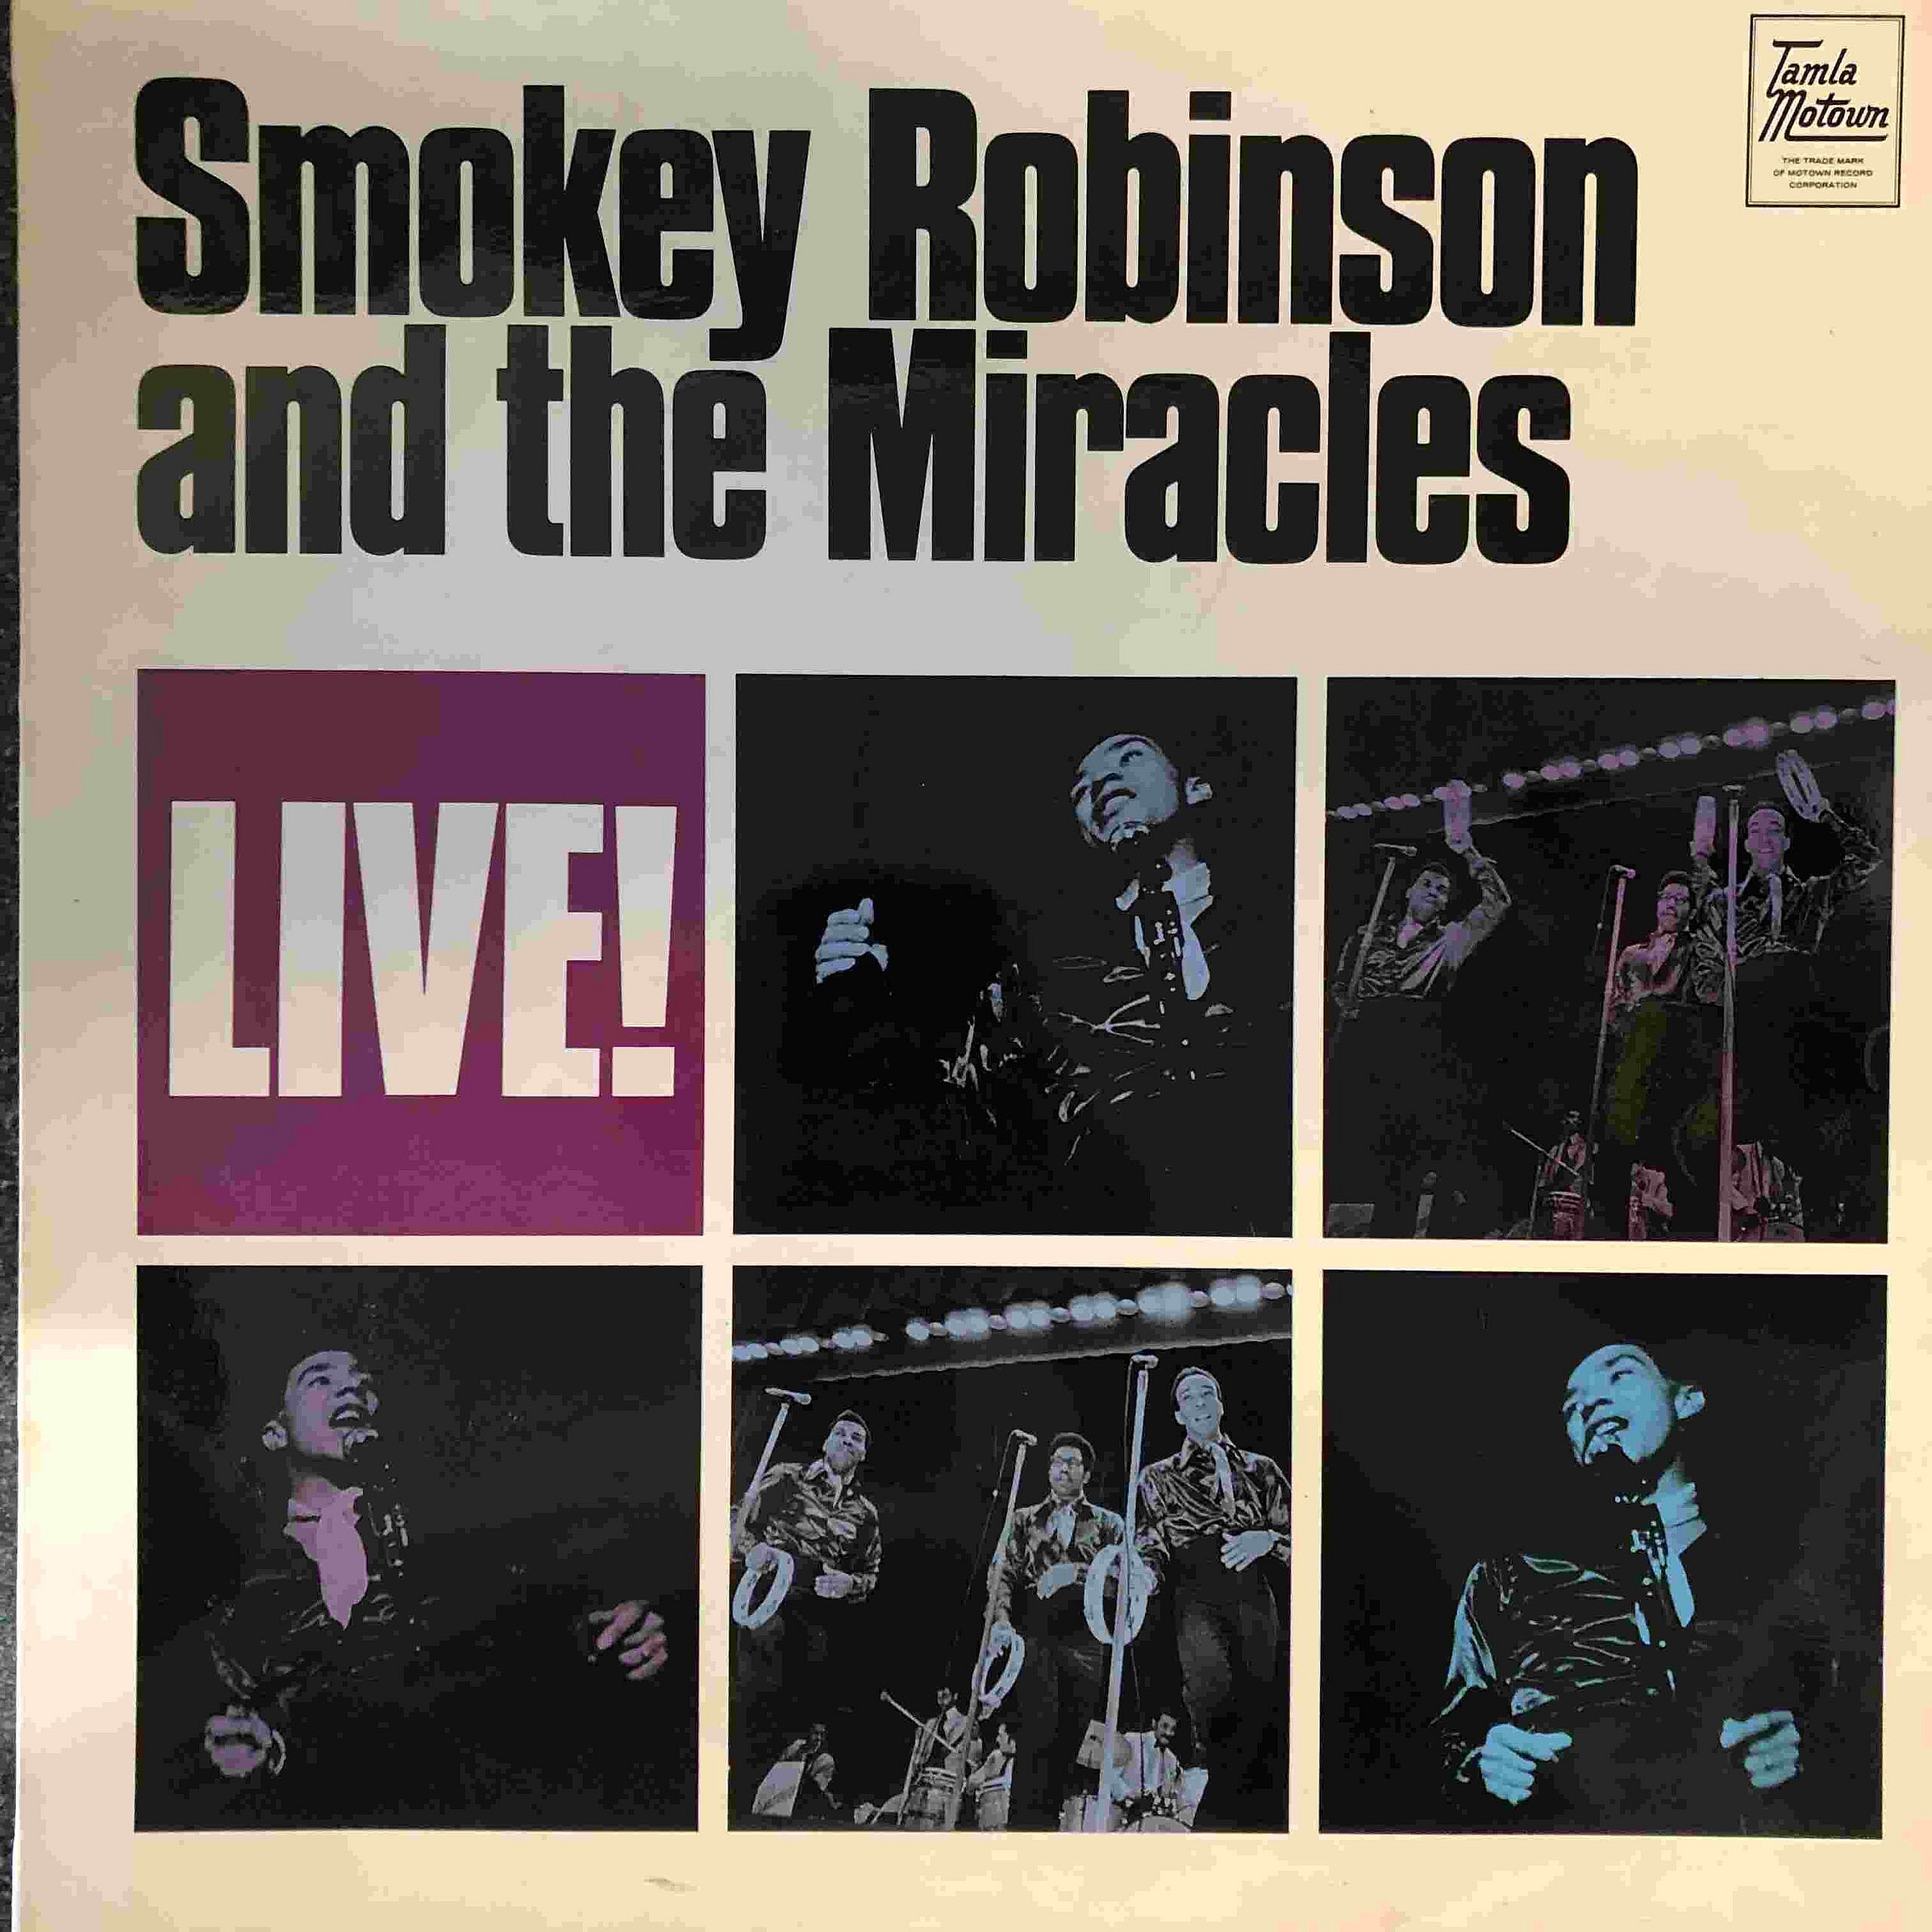 Smokey Robinson and the Miracles Live!